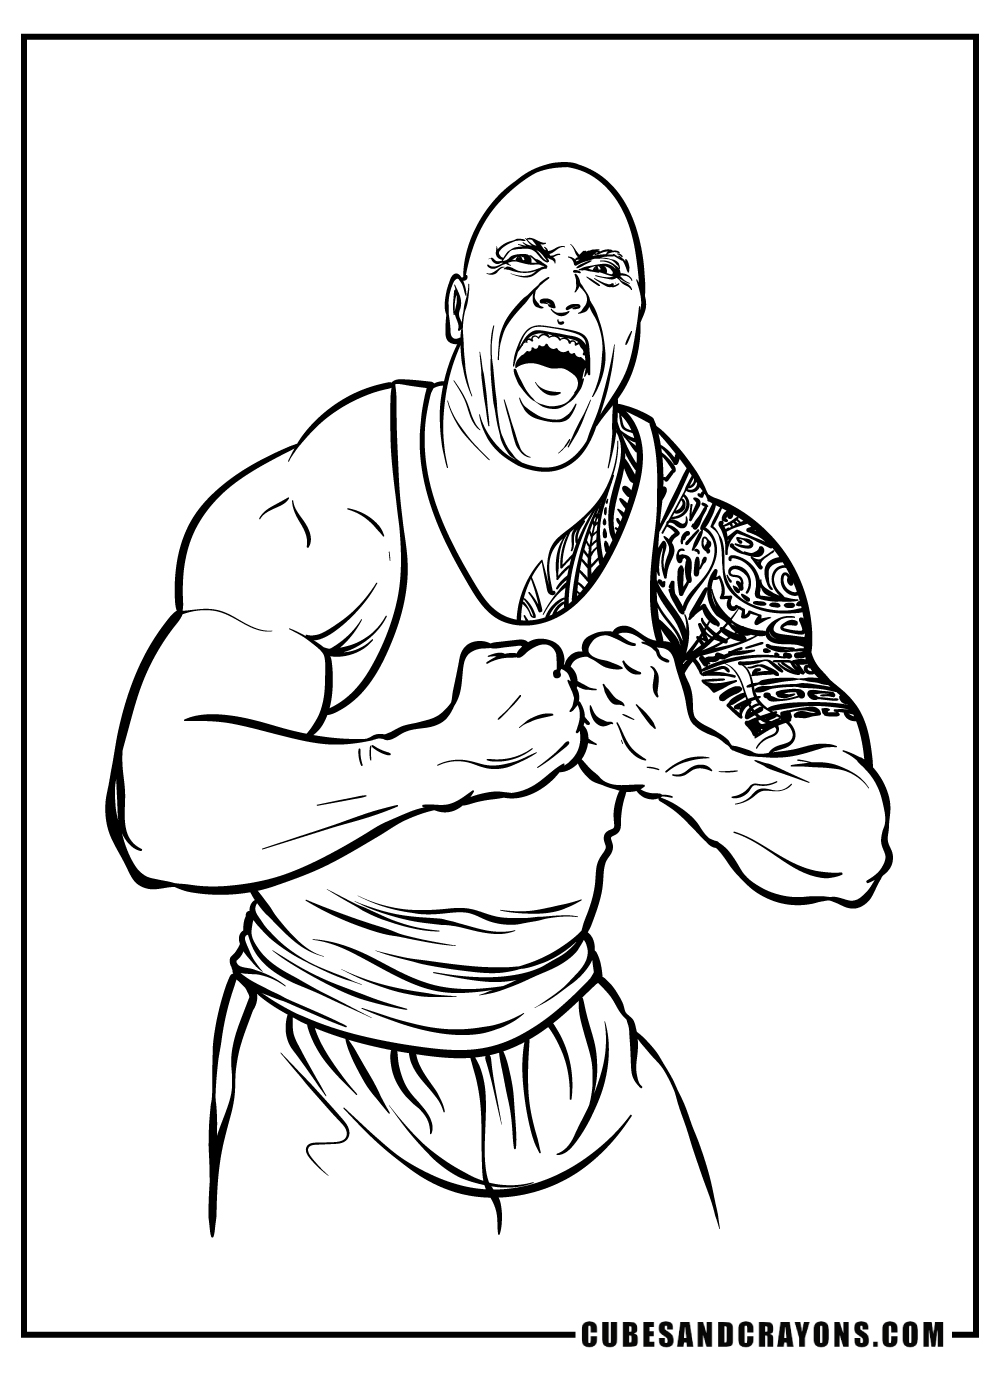 Wwe coloring pages free printables